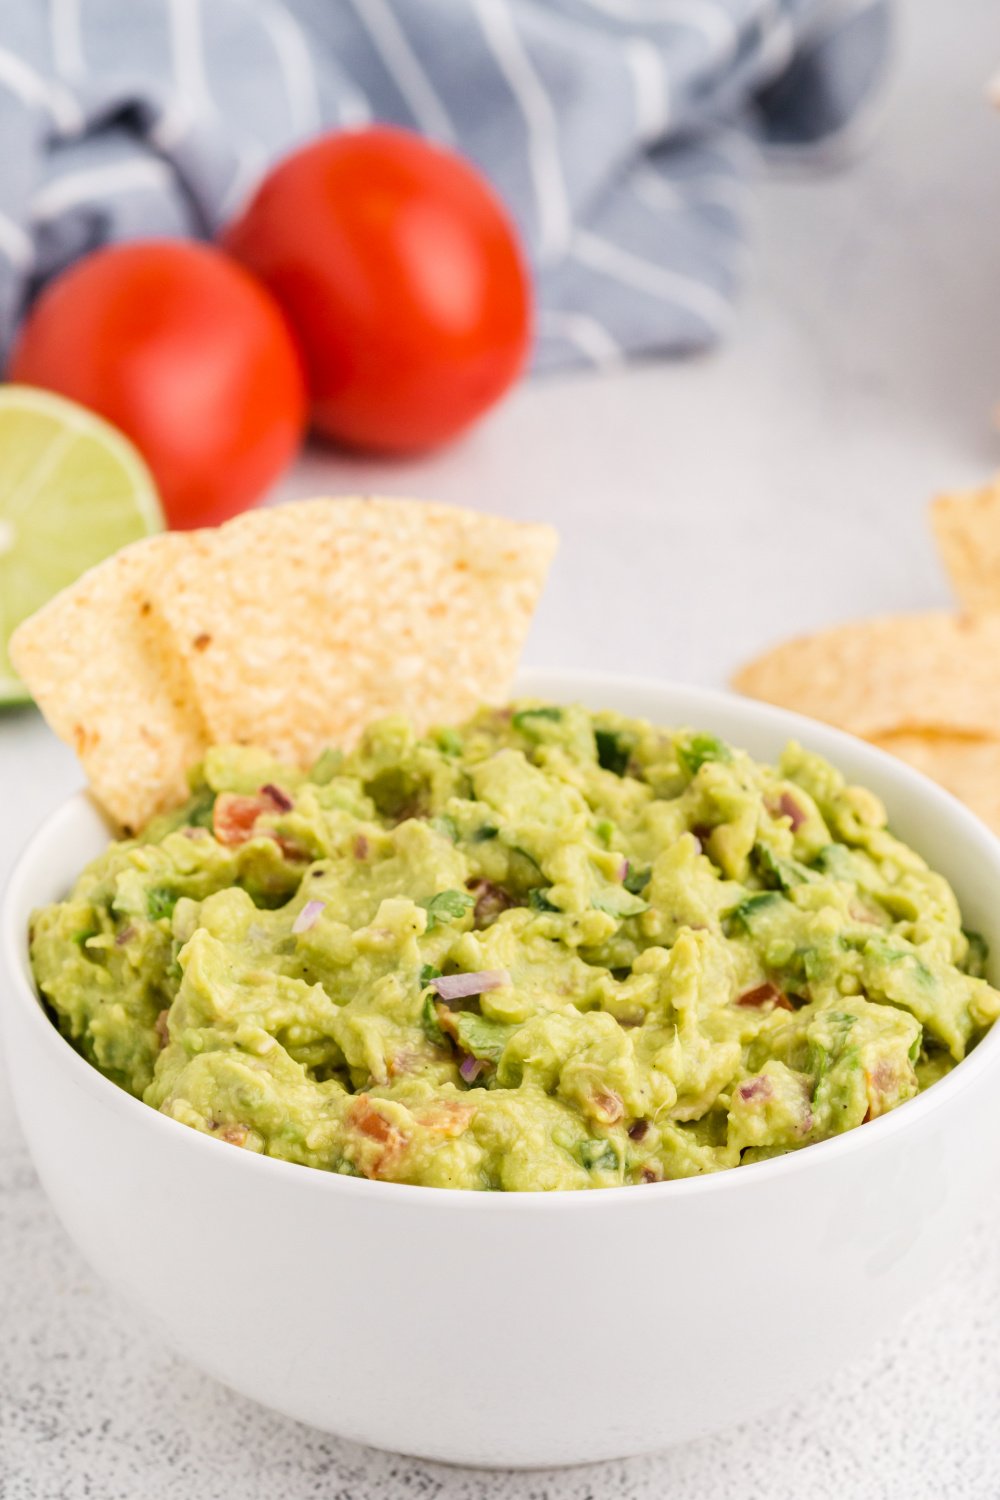 This Homemade Guacamole is so easy to make! Just chop everything up, combine it in a bowl, and mash to your preferred level of chunkiness. via @familyfresh